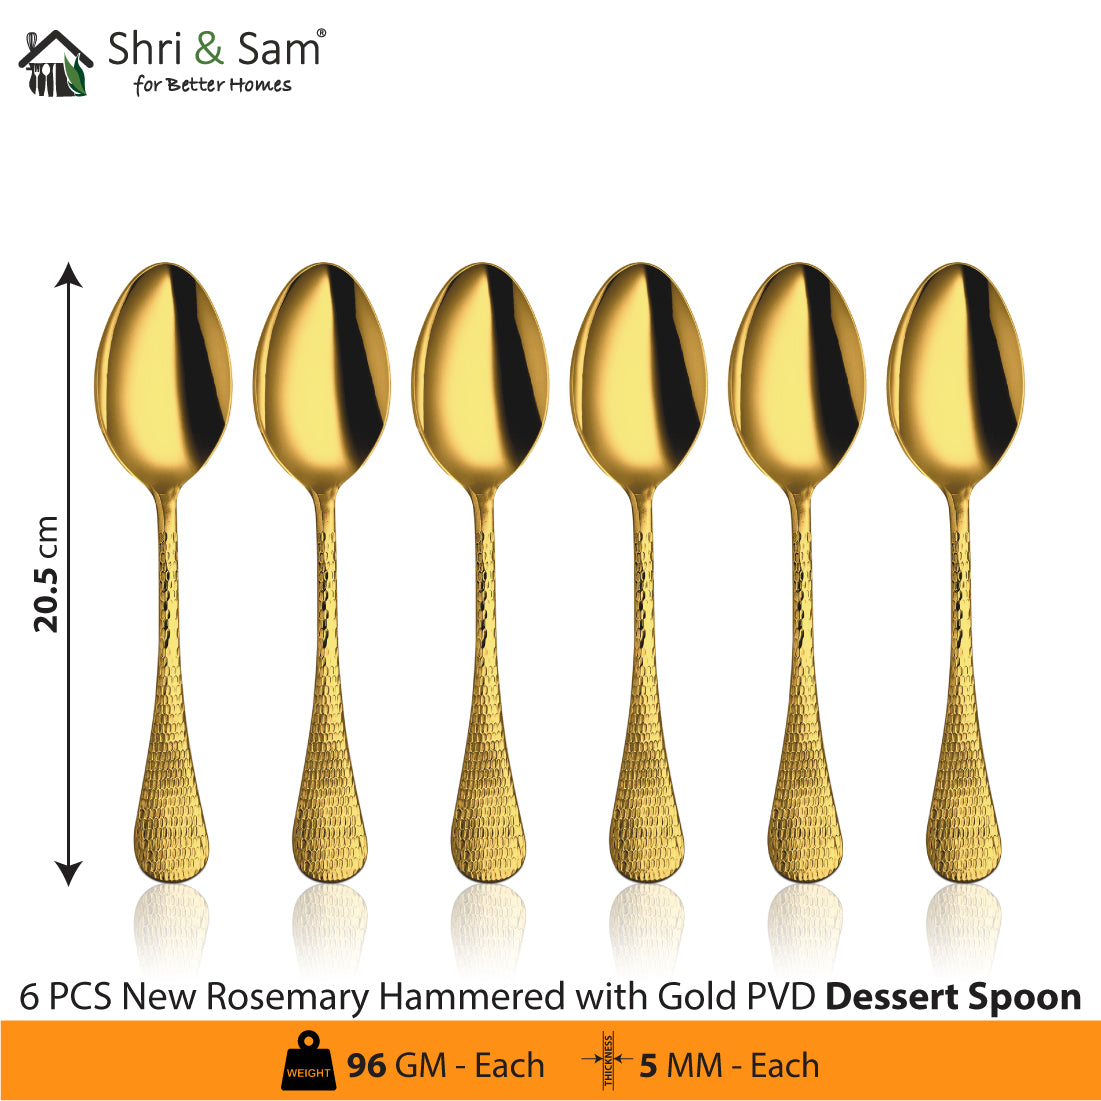 Stainless Steel 24 PCS Cutlery Set with Gold PVD Coating New Rosemary Hammered